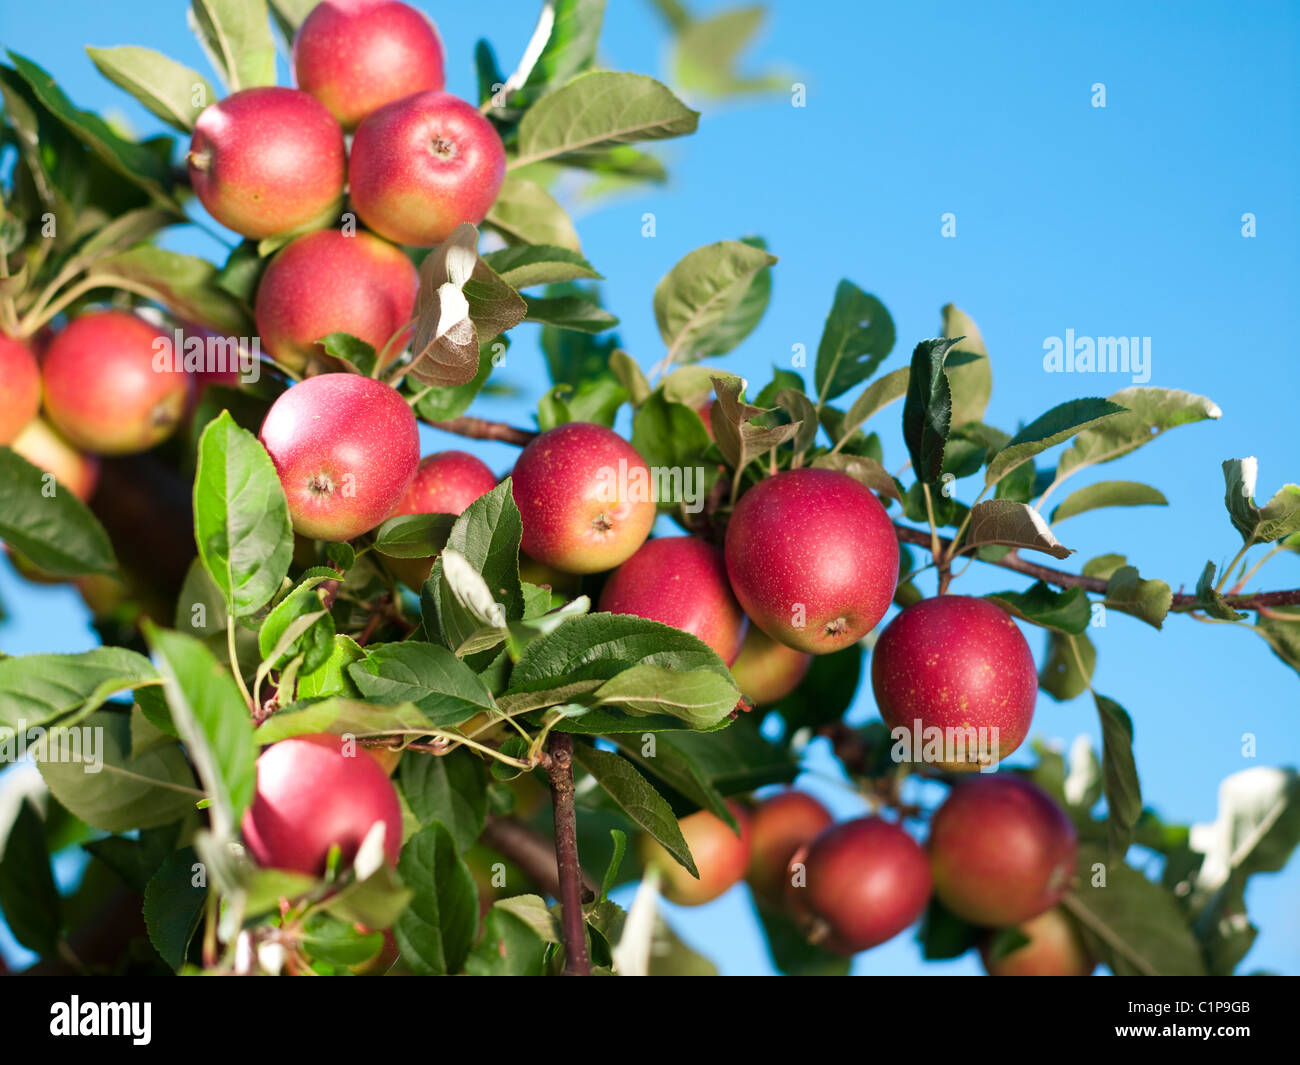 Apples on branch against clear sky Stock Photo